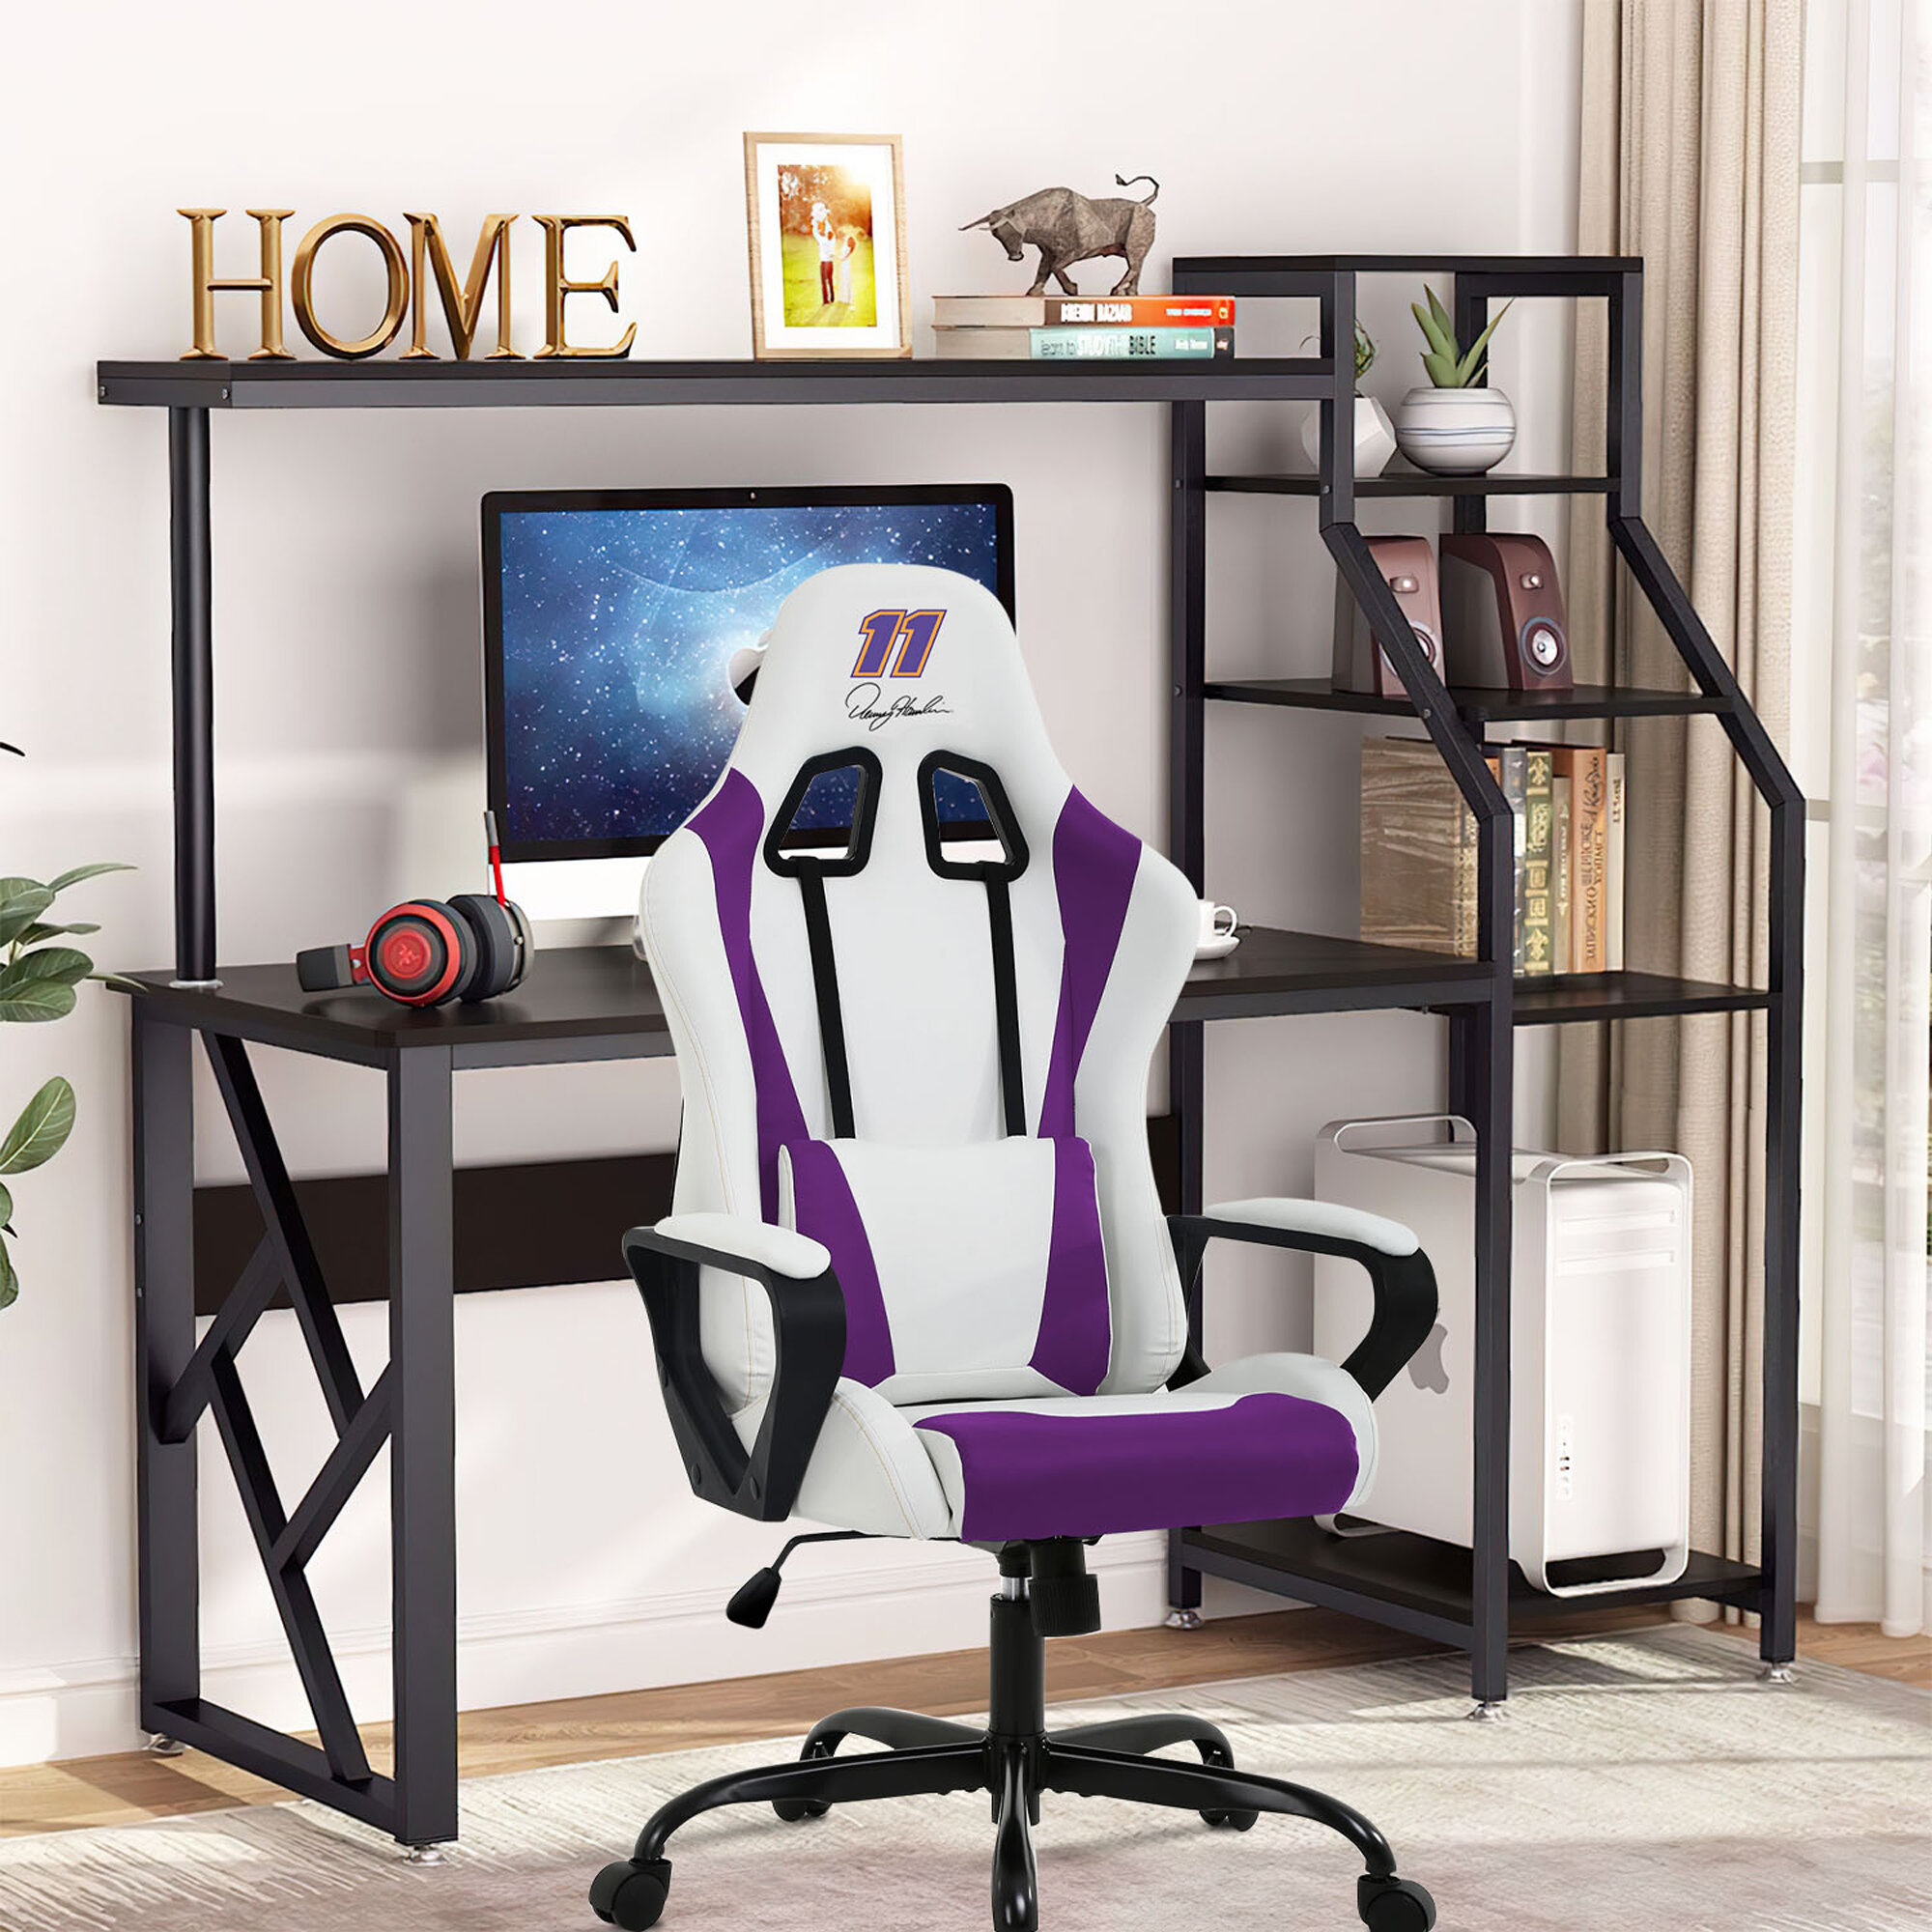 360° PU Leather Office Executive Racing Gaming Chair Swivel Computer Desk Chair 